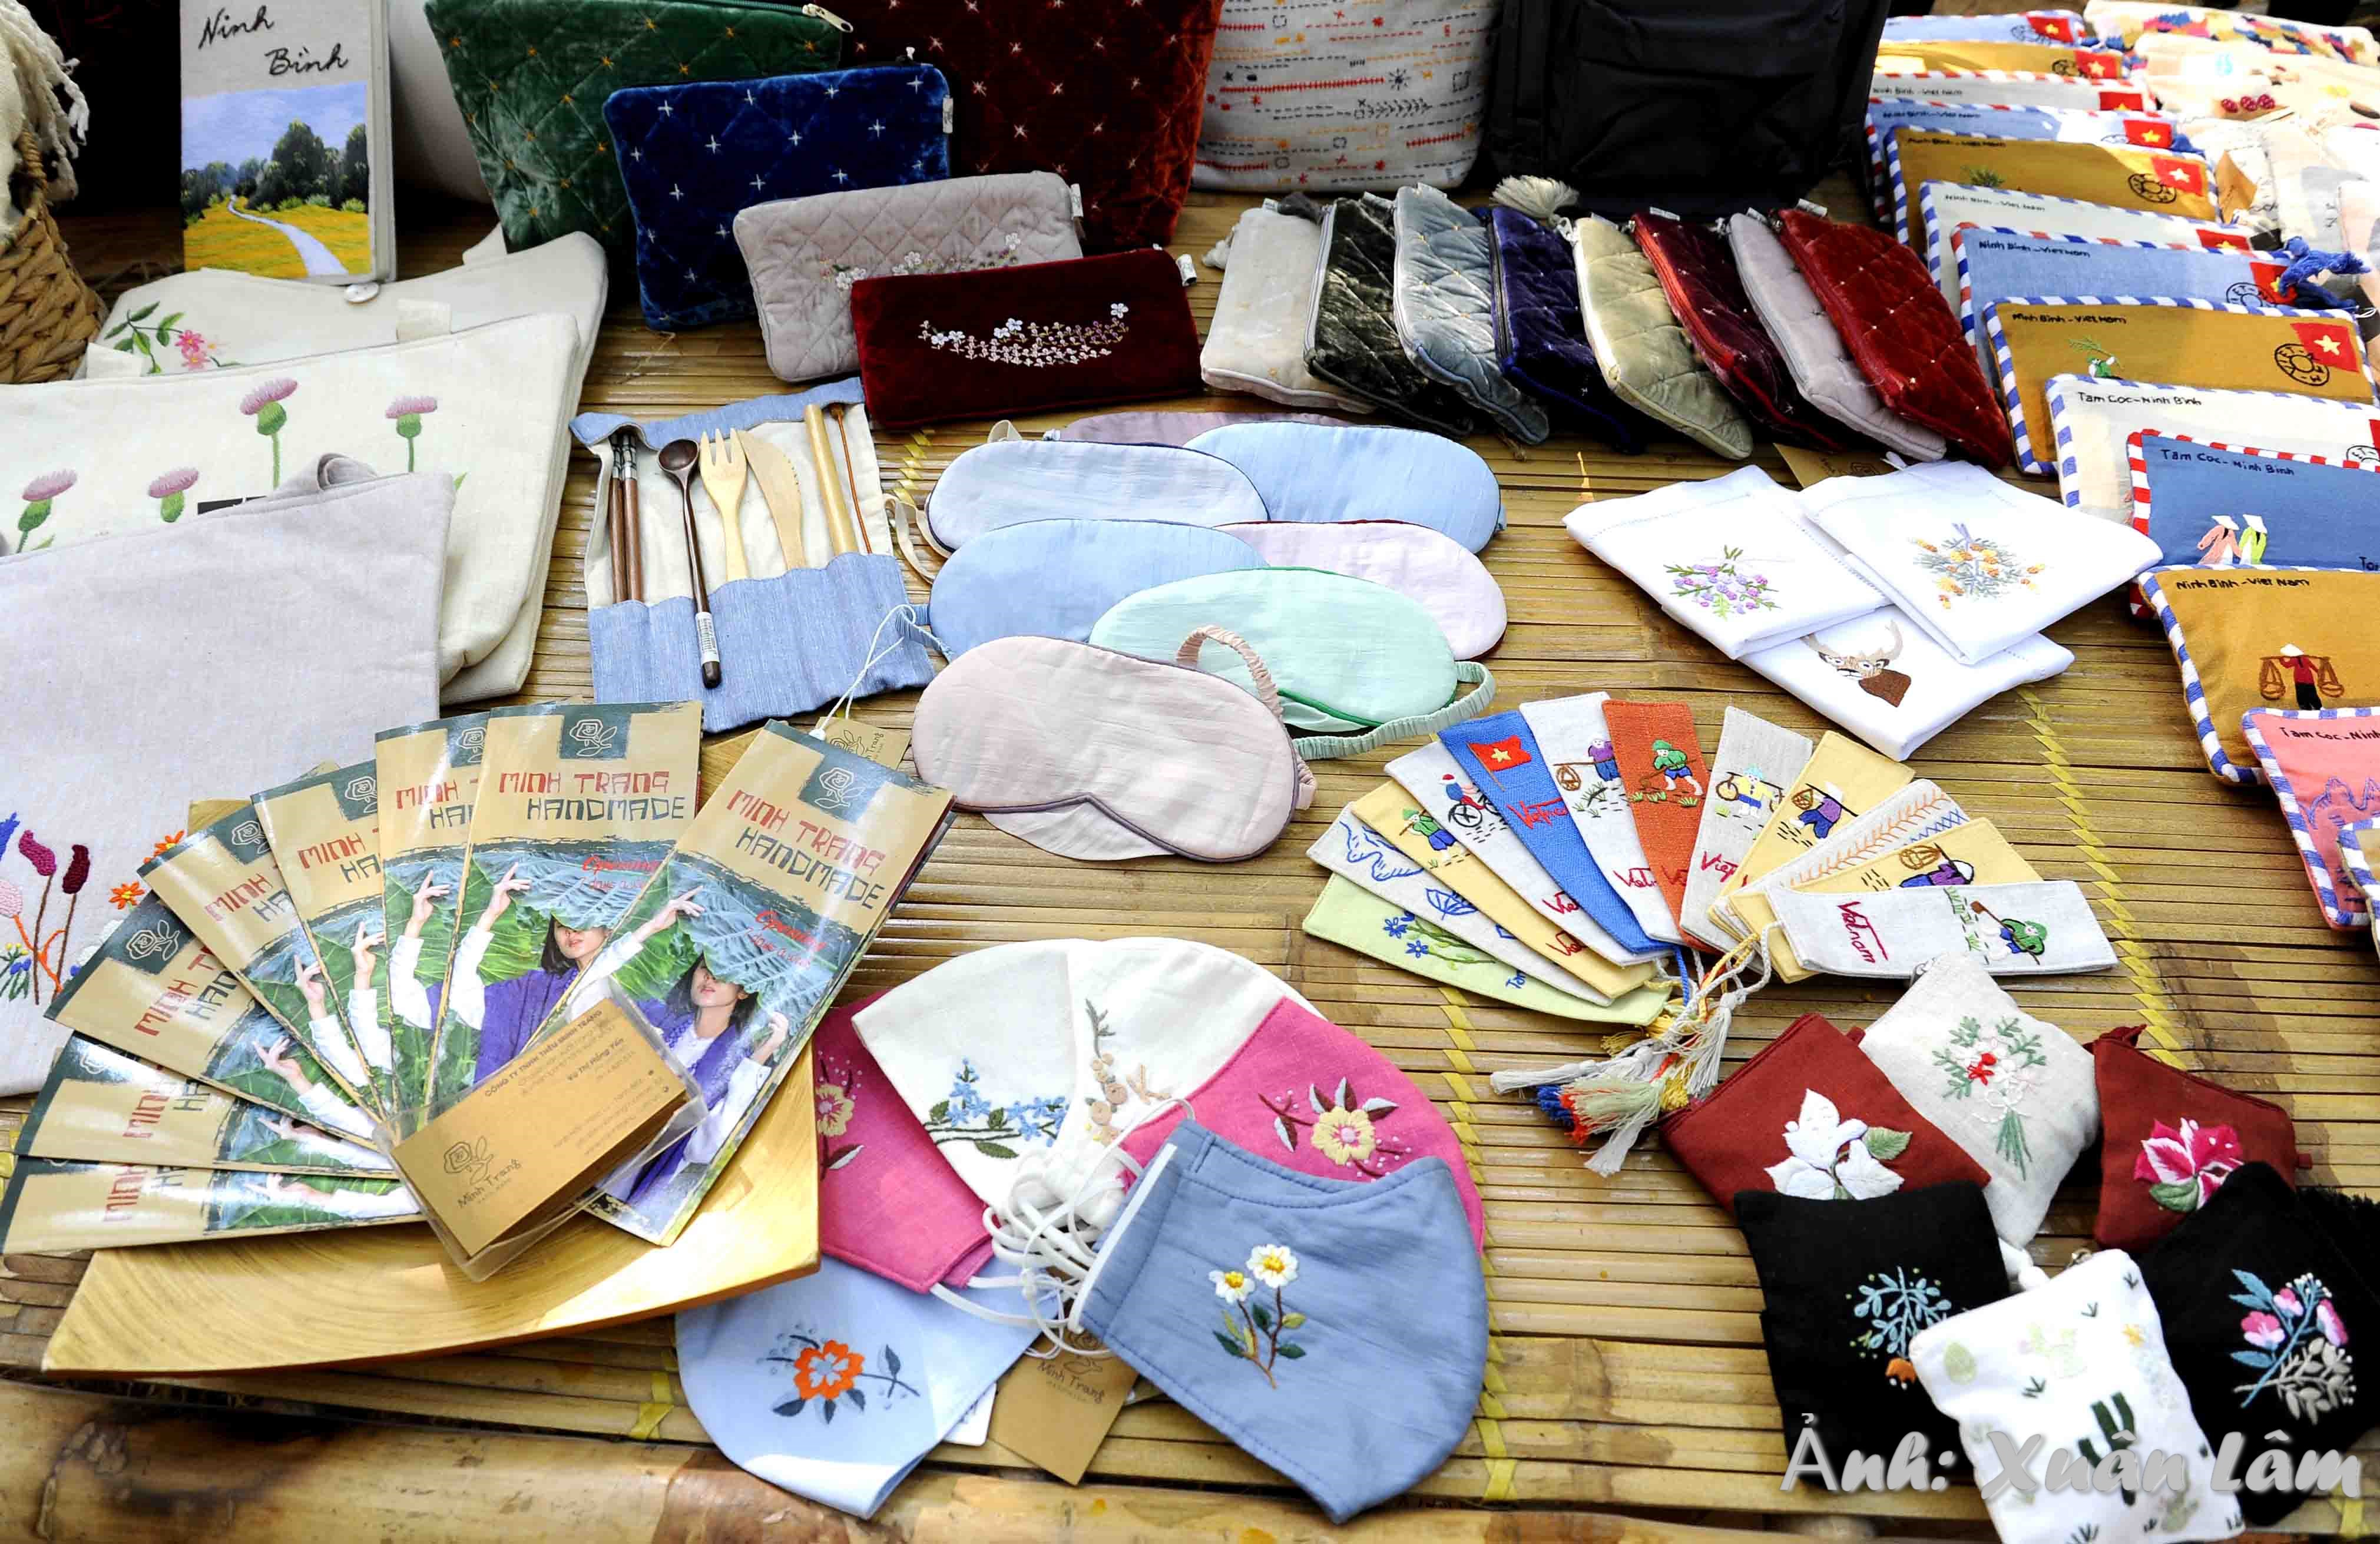 Van Lam embroidery craft village - To inherit the quintessence of the traditional craft village